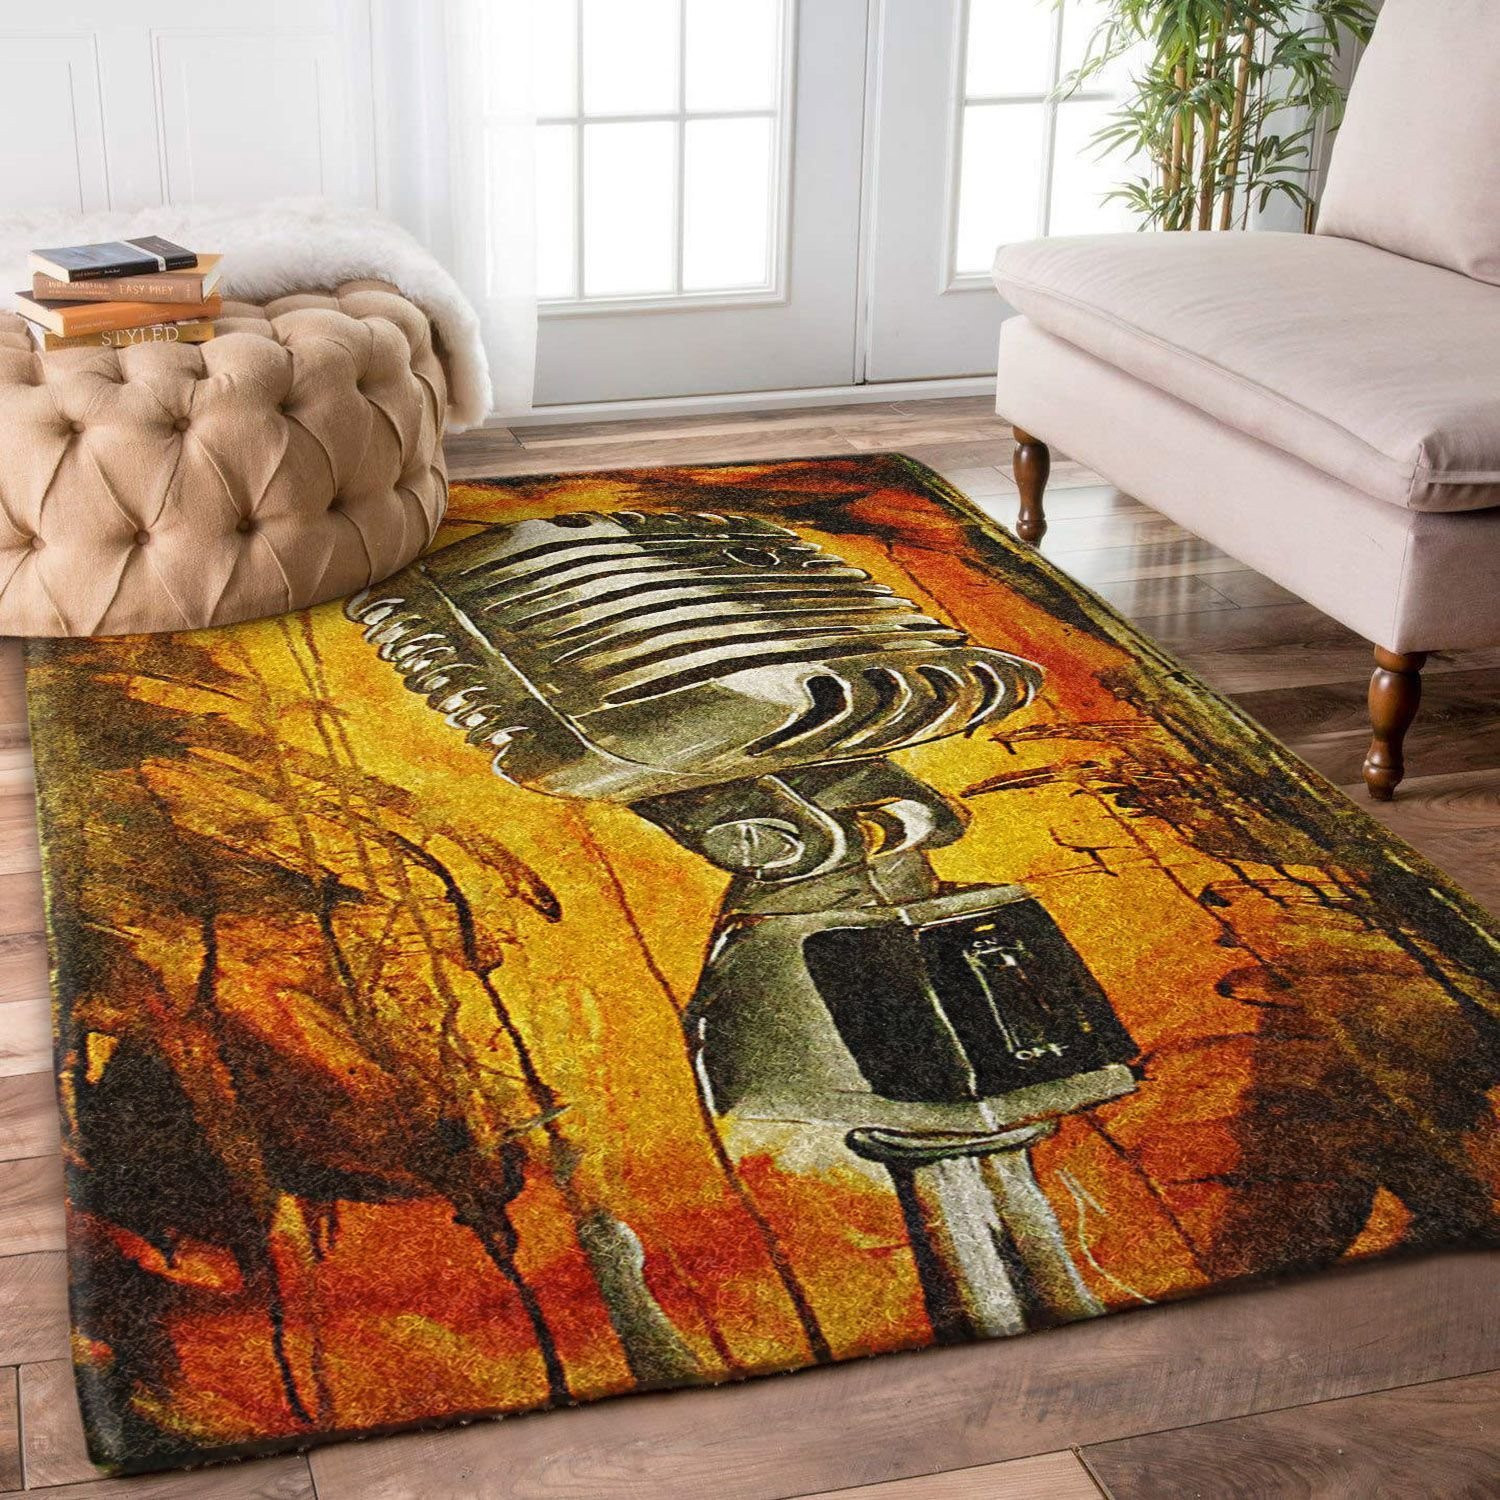 Microphone Rugs Home Decor